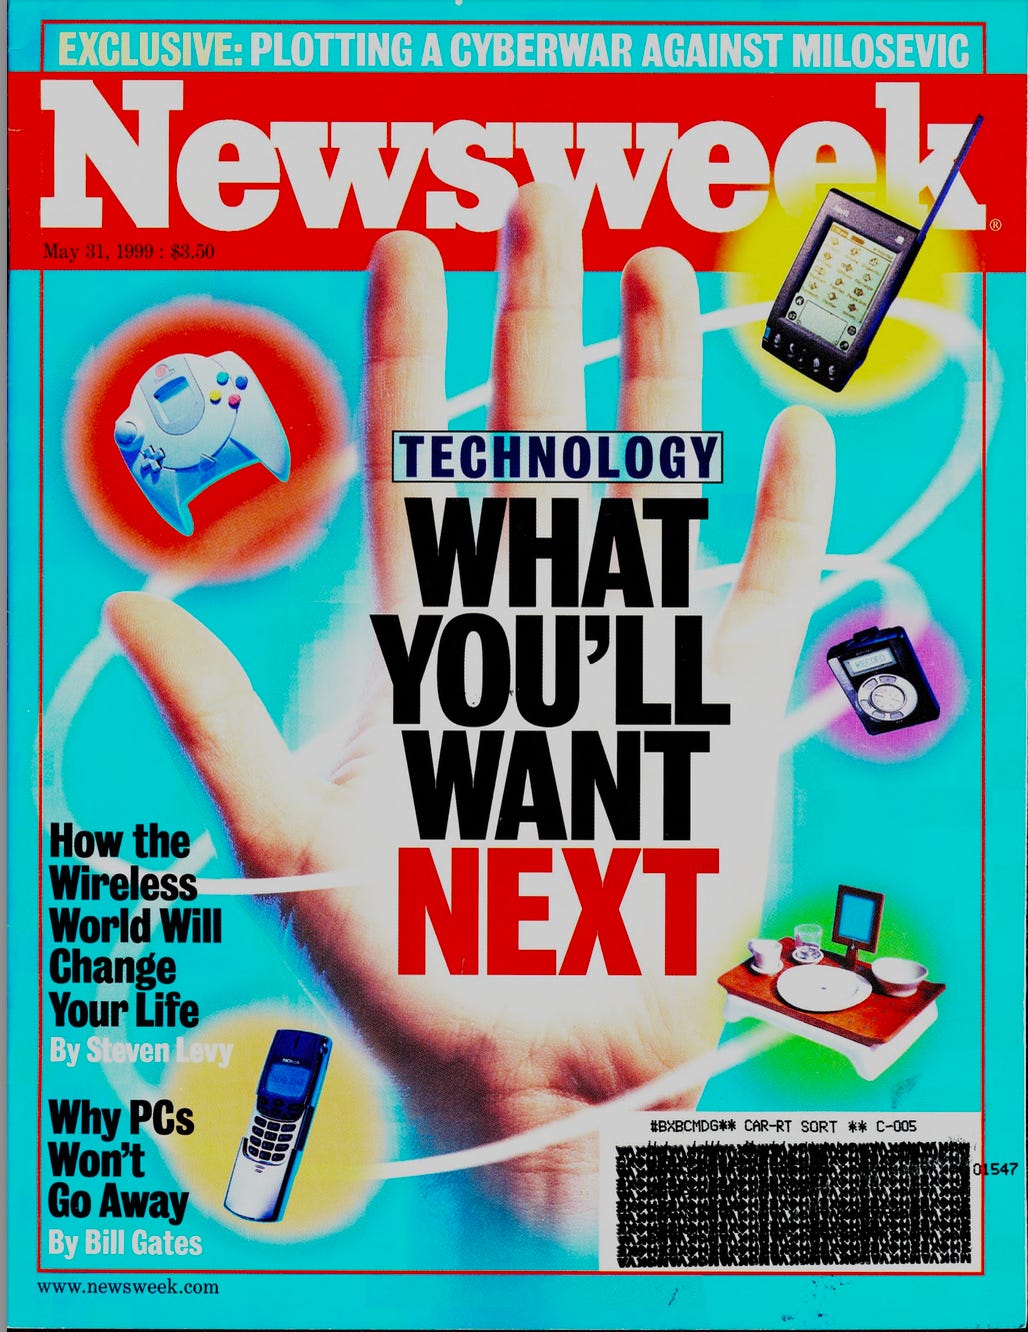 Newsweek cover "What You'll Want Next" in technology. Photos of lots of gadgets including the Palm VII